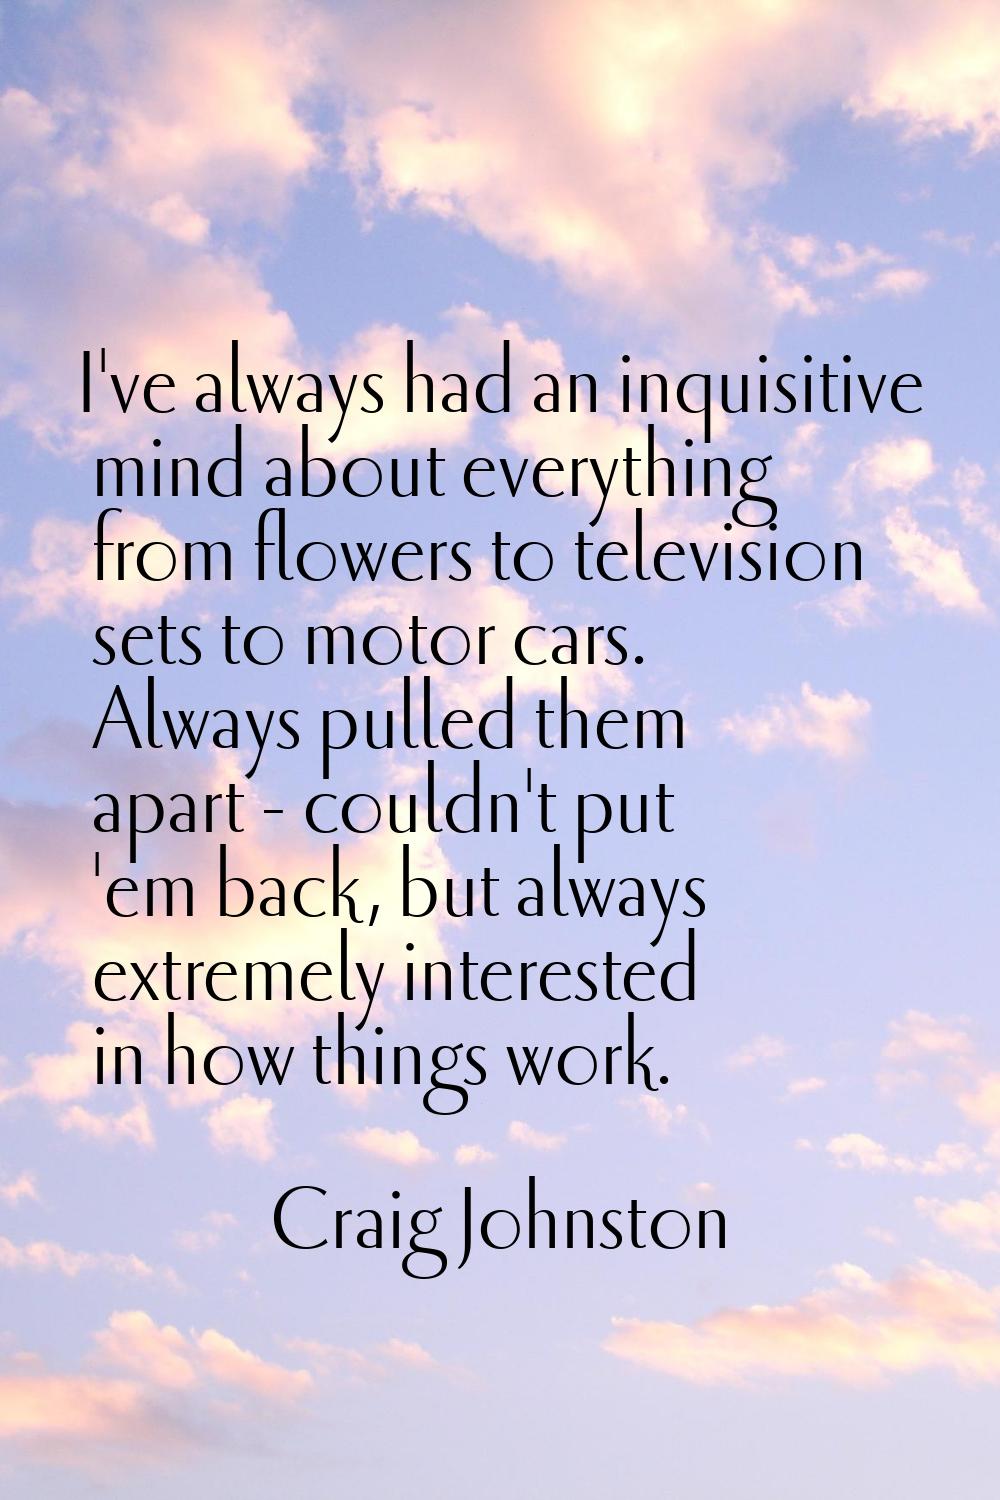 I've always had an inquisitive mind about everything from flowers to television sets to motor cars.